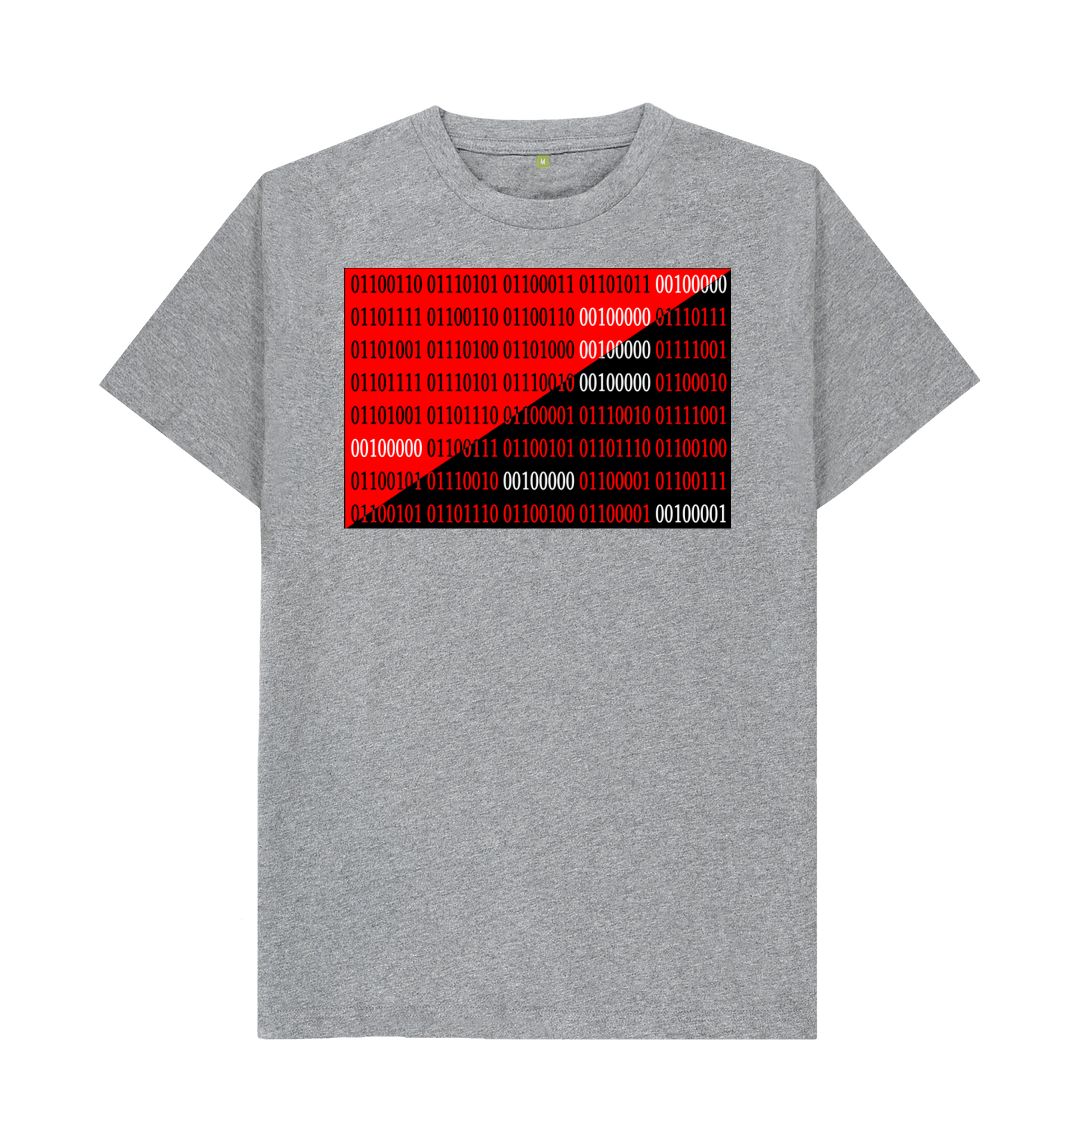 Athletic Grey Fuck off with your binary gender agenda unisex T-shirt